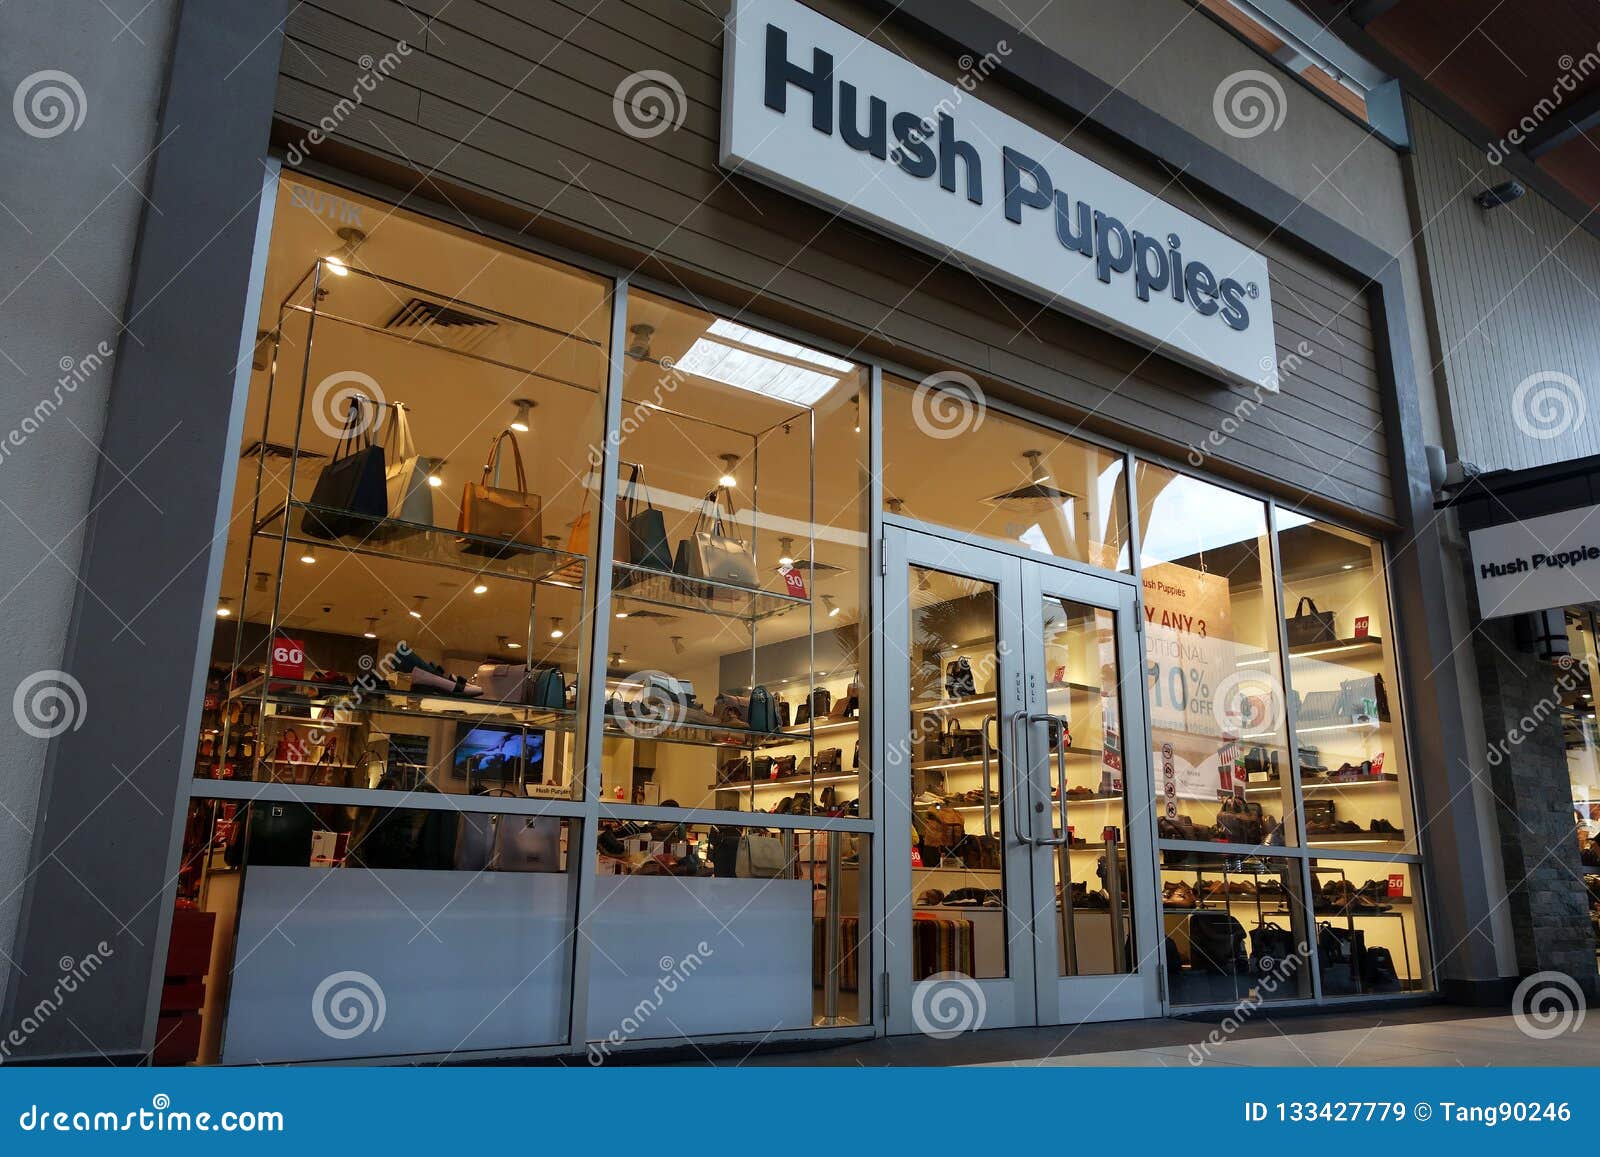 Hush Puppies Store at Genting Highlands Premium Outlets Stock Image - Image of company, footwear: 133427779